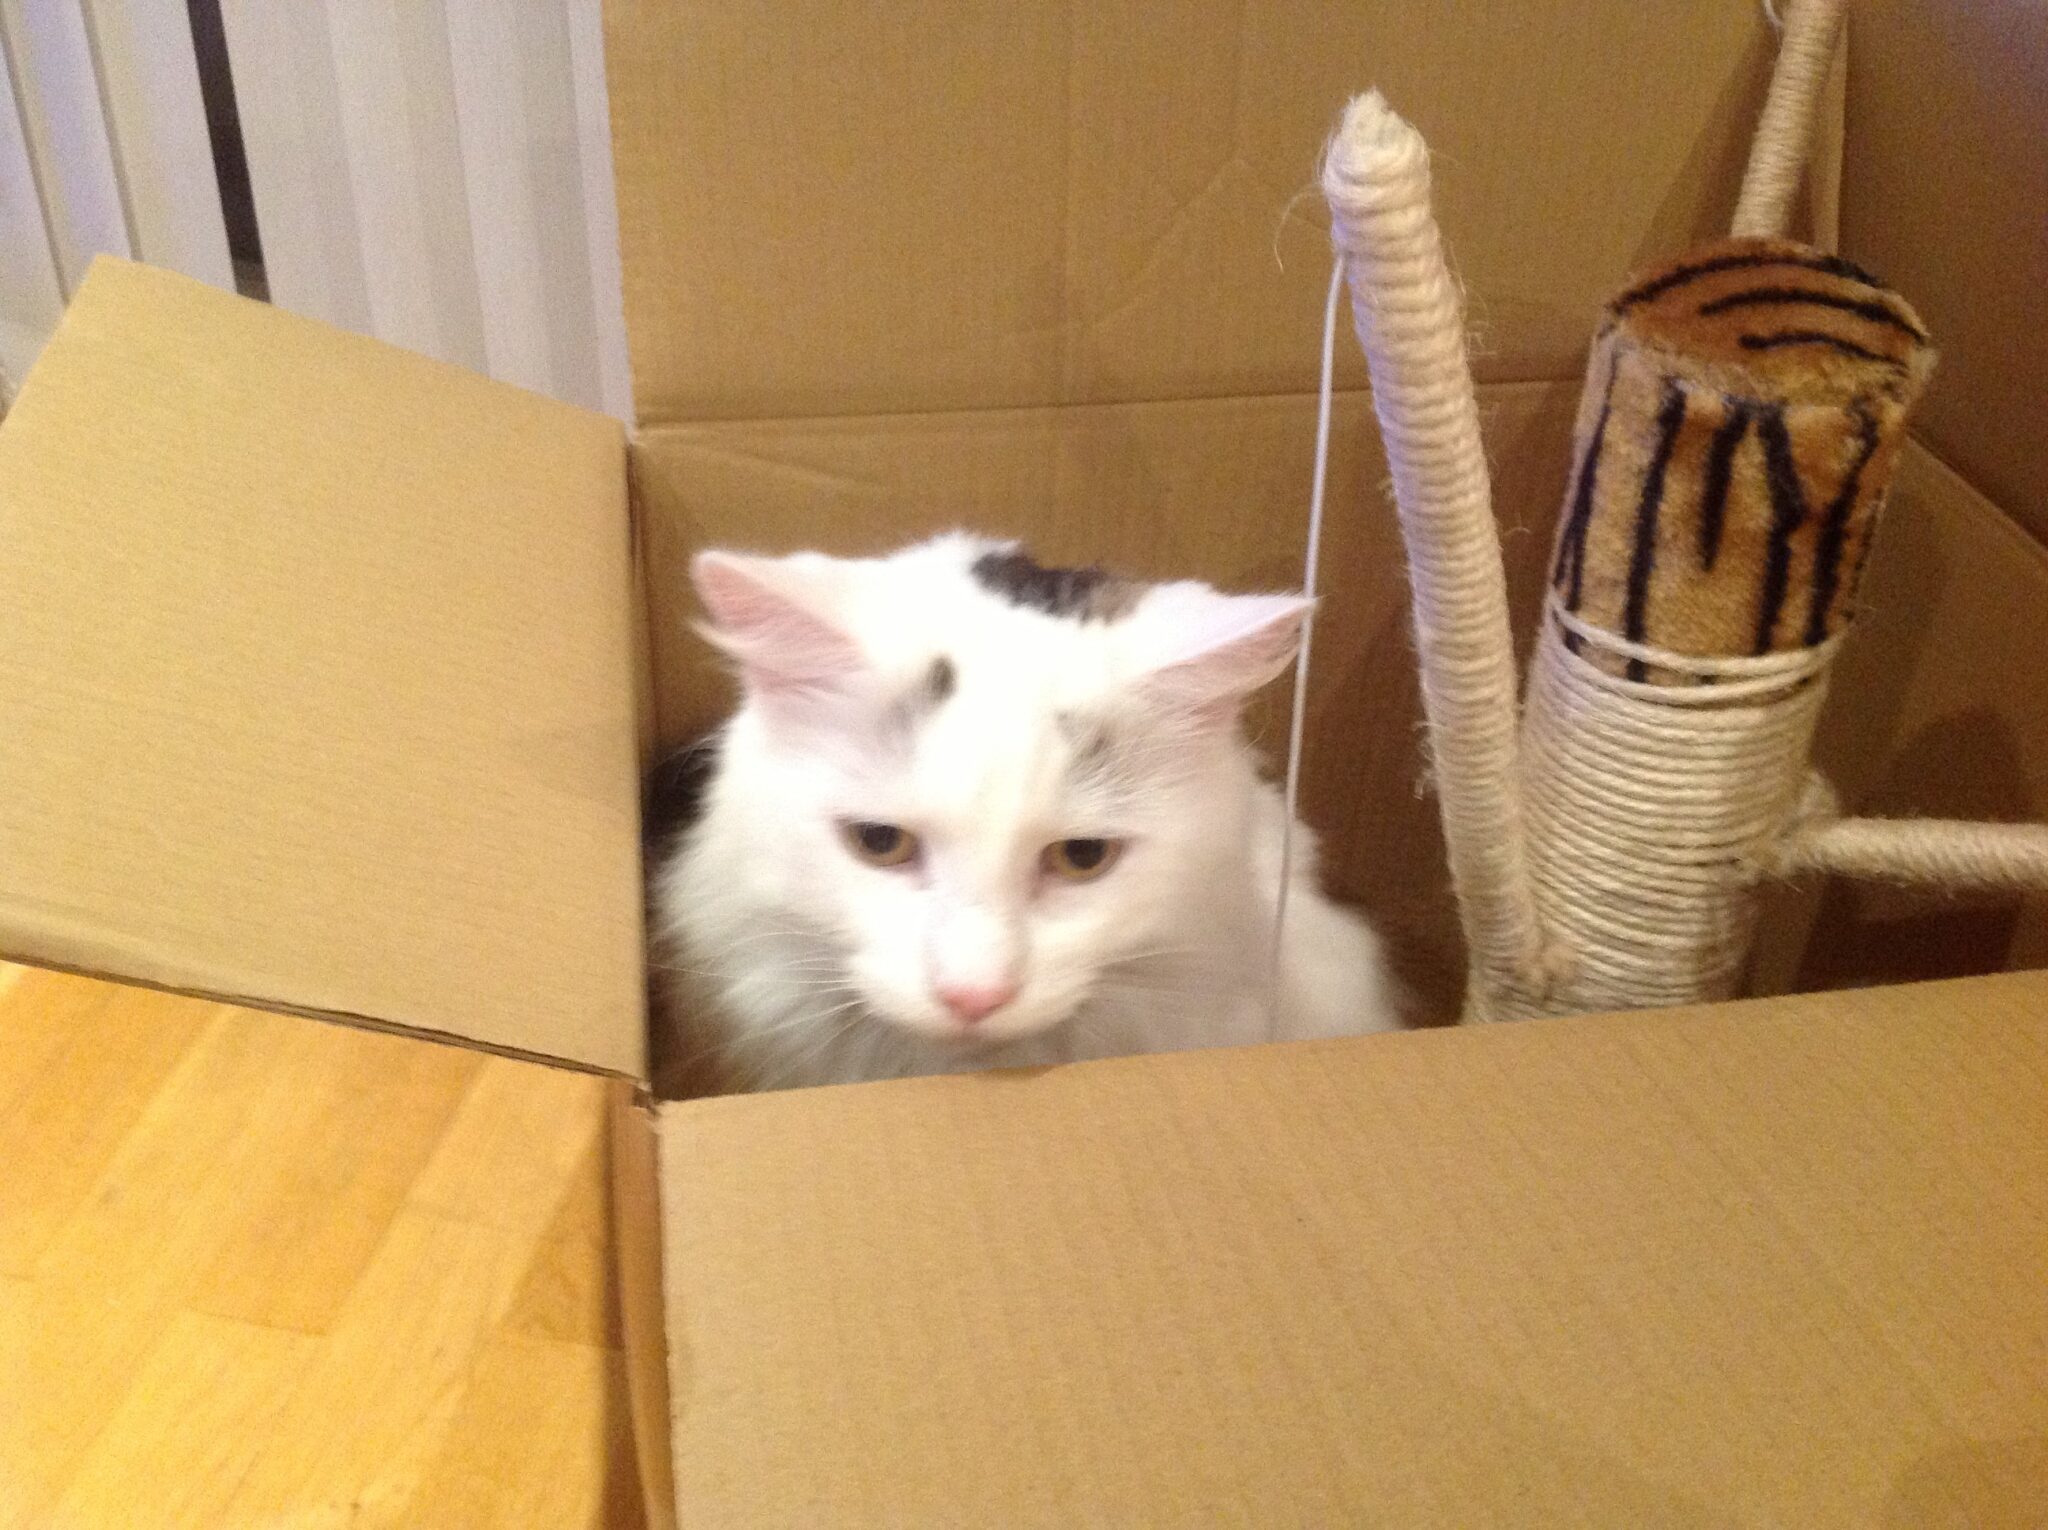 My Cat Curbi Sat in a Box - Manchester Removals & Storage - Manchester Removals & Storage